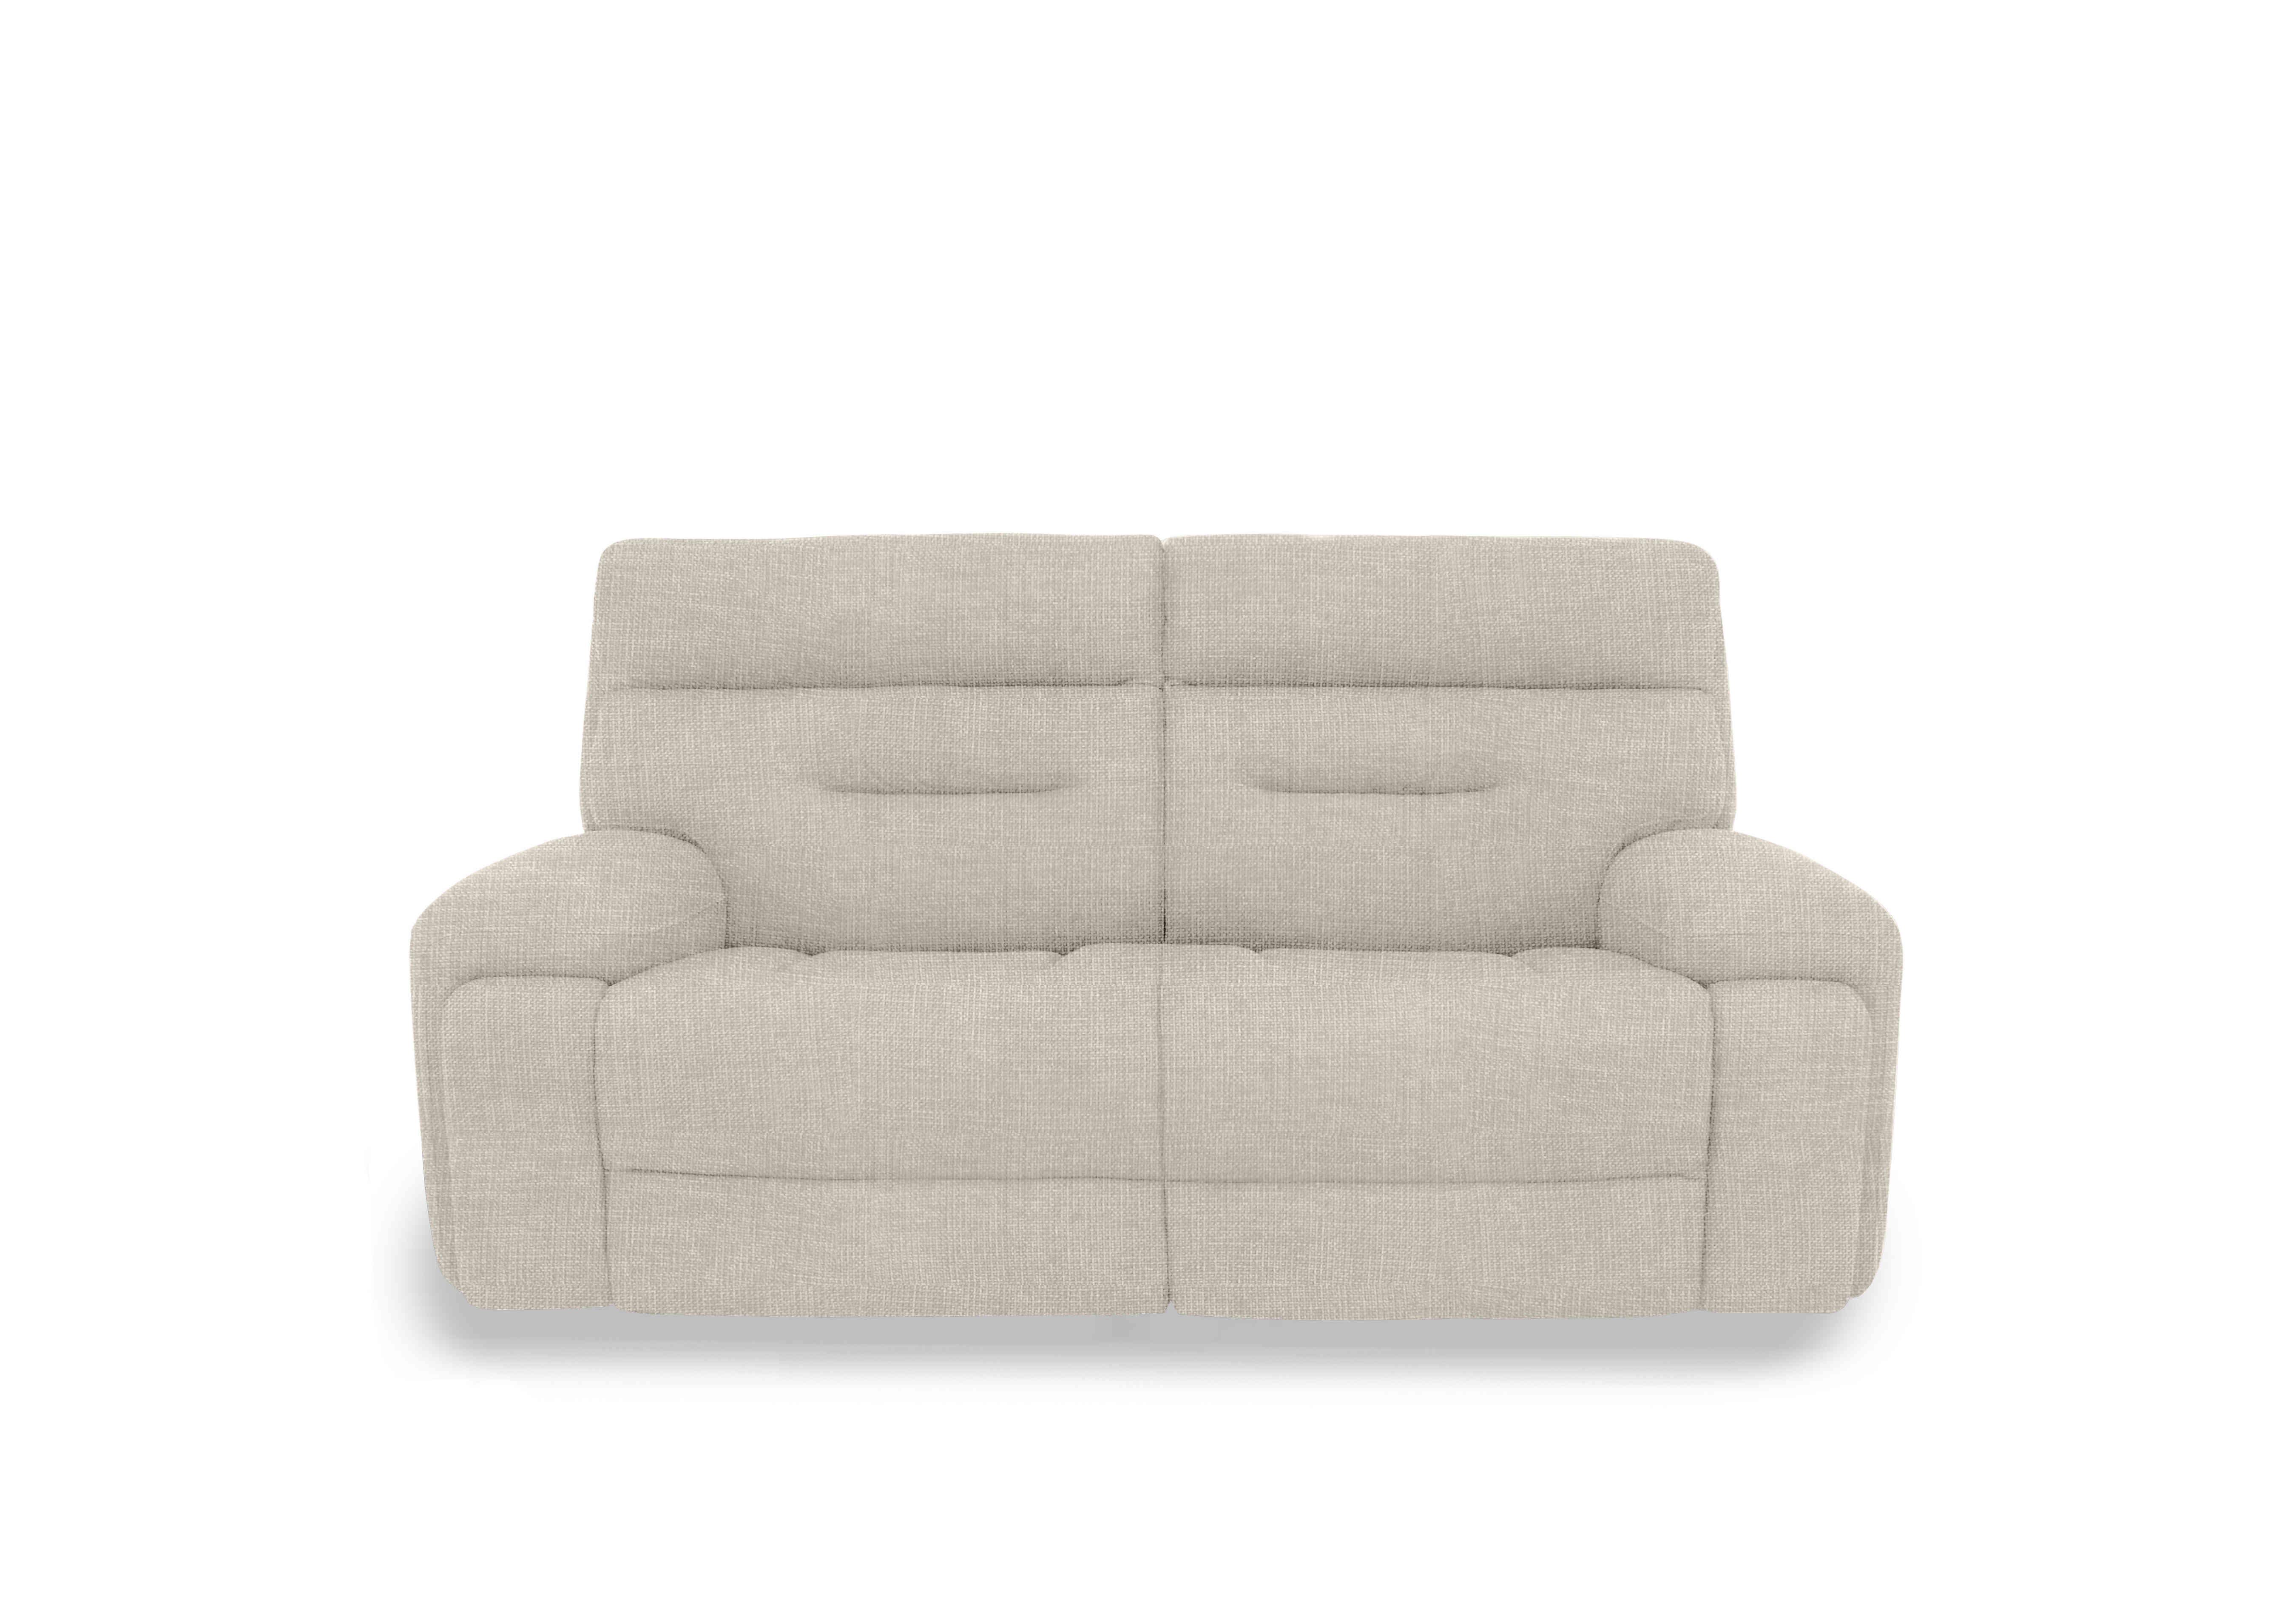 Cinemax 3 Seater Fabric Sofa in We-0102  Weave Stone on Furniture Village